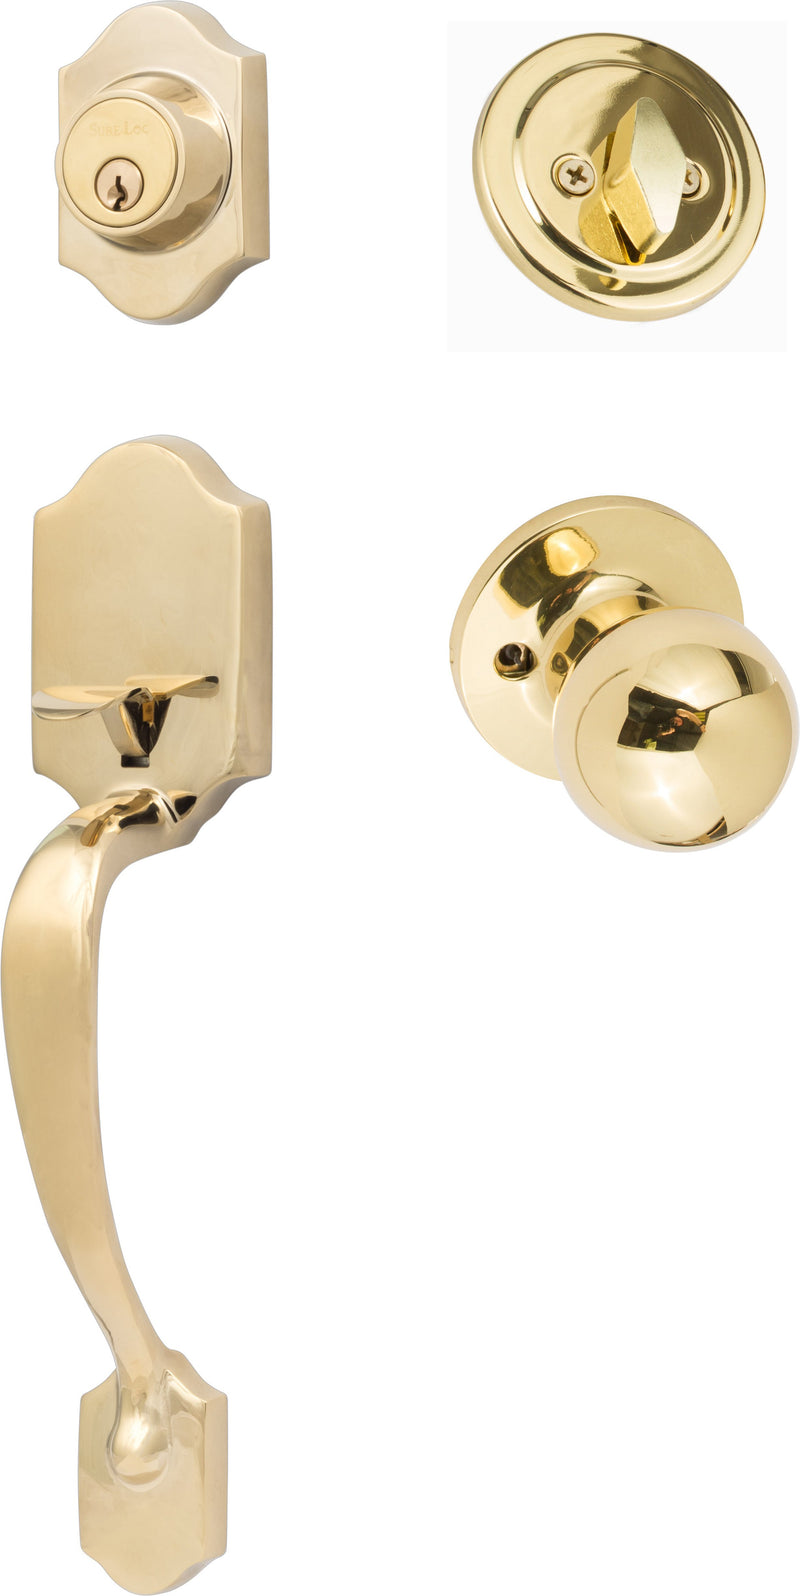 Sure-Loc Coral Handleset With Tahoe Knob Interior Trim in Polished Brass finish